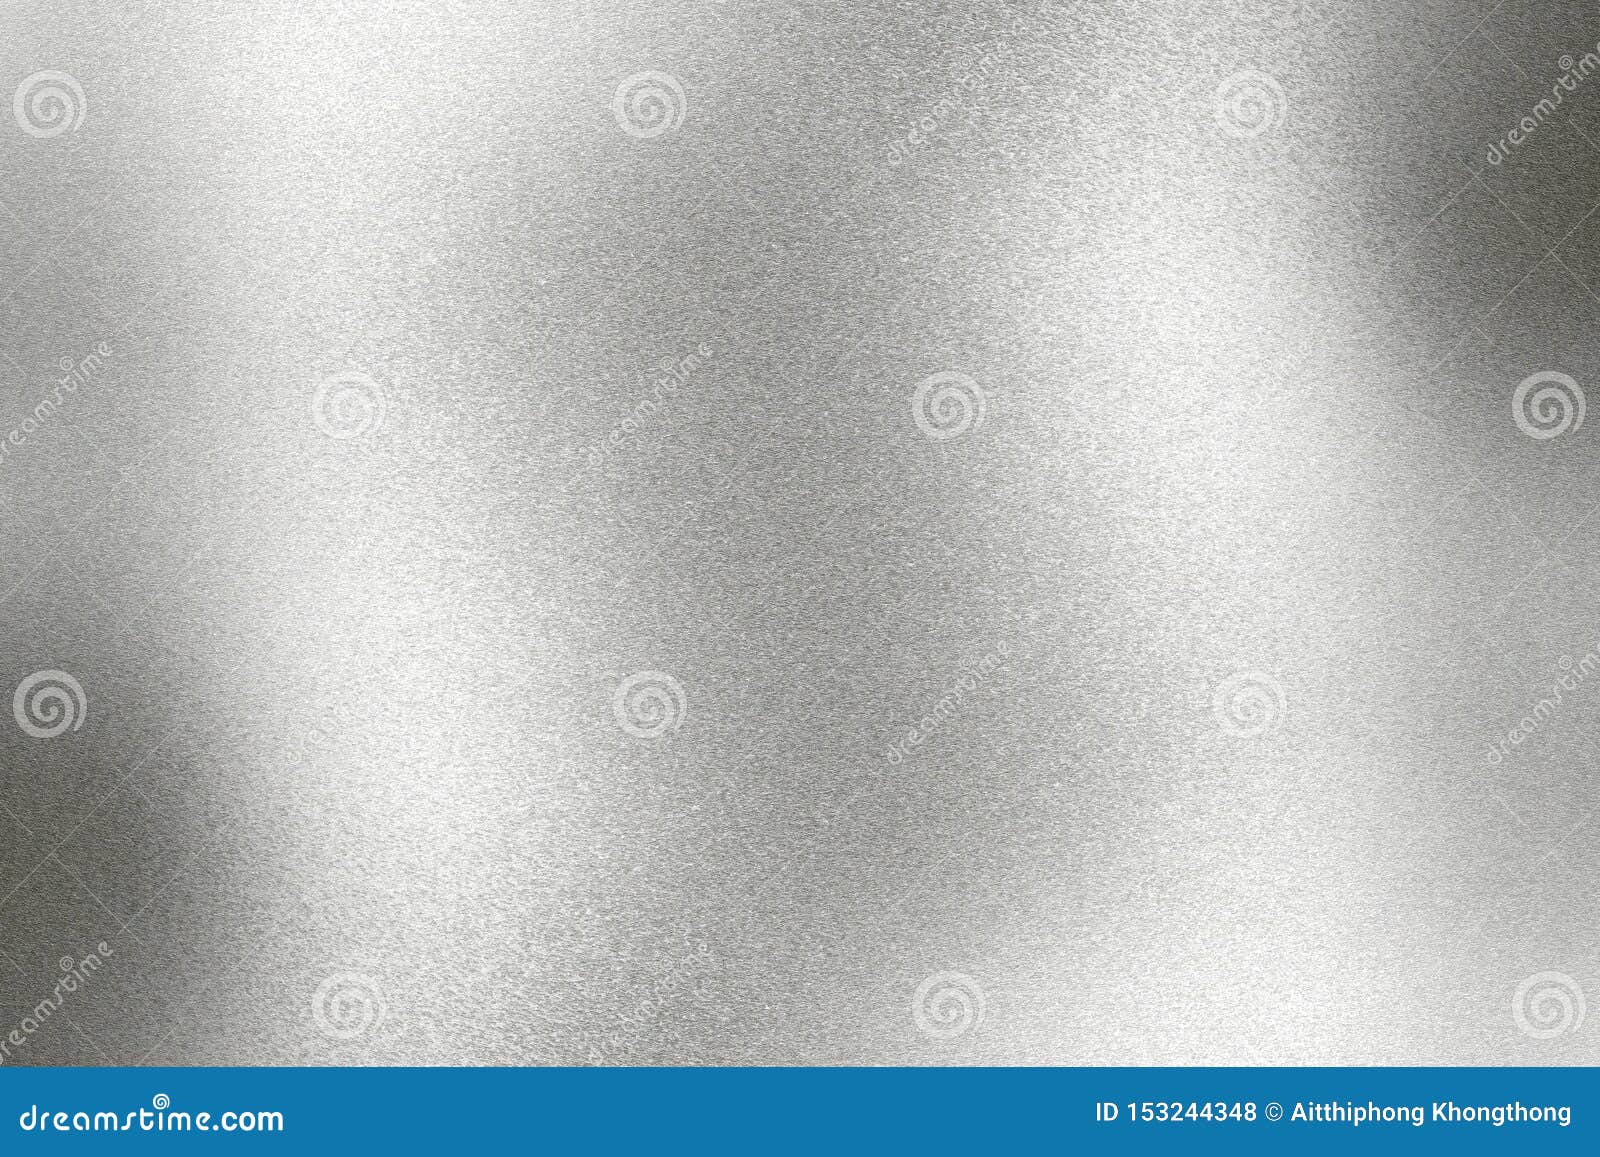 Light Shining on Old Silver Metallic Wall, Abstract Texture Background ...